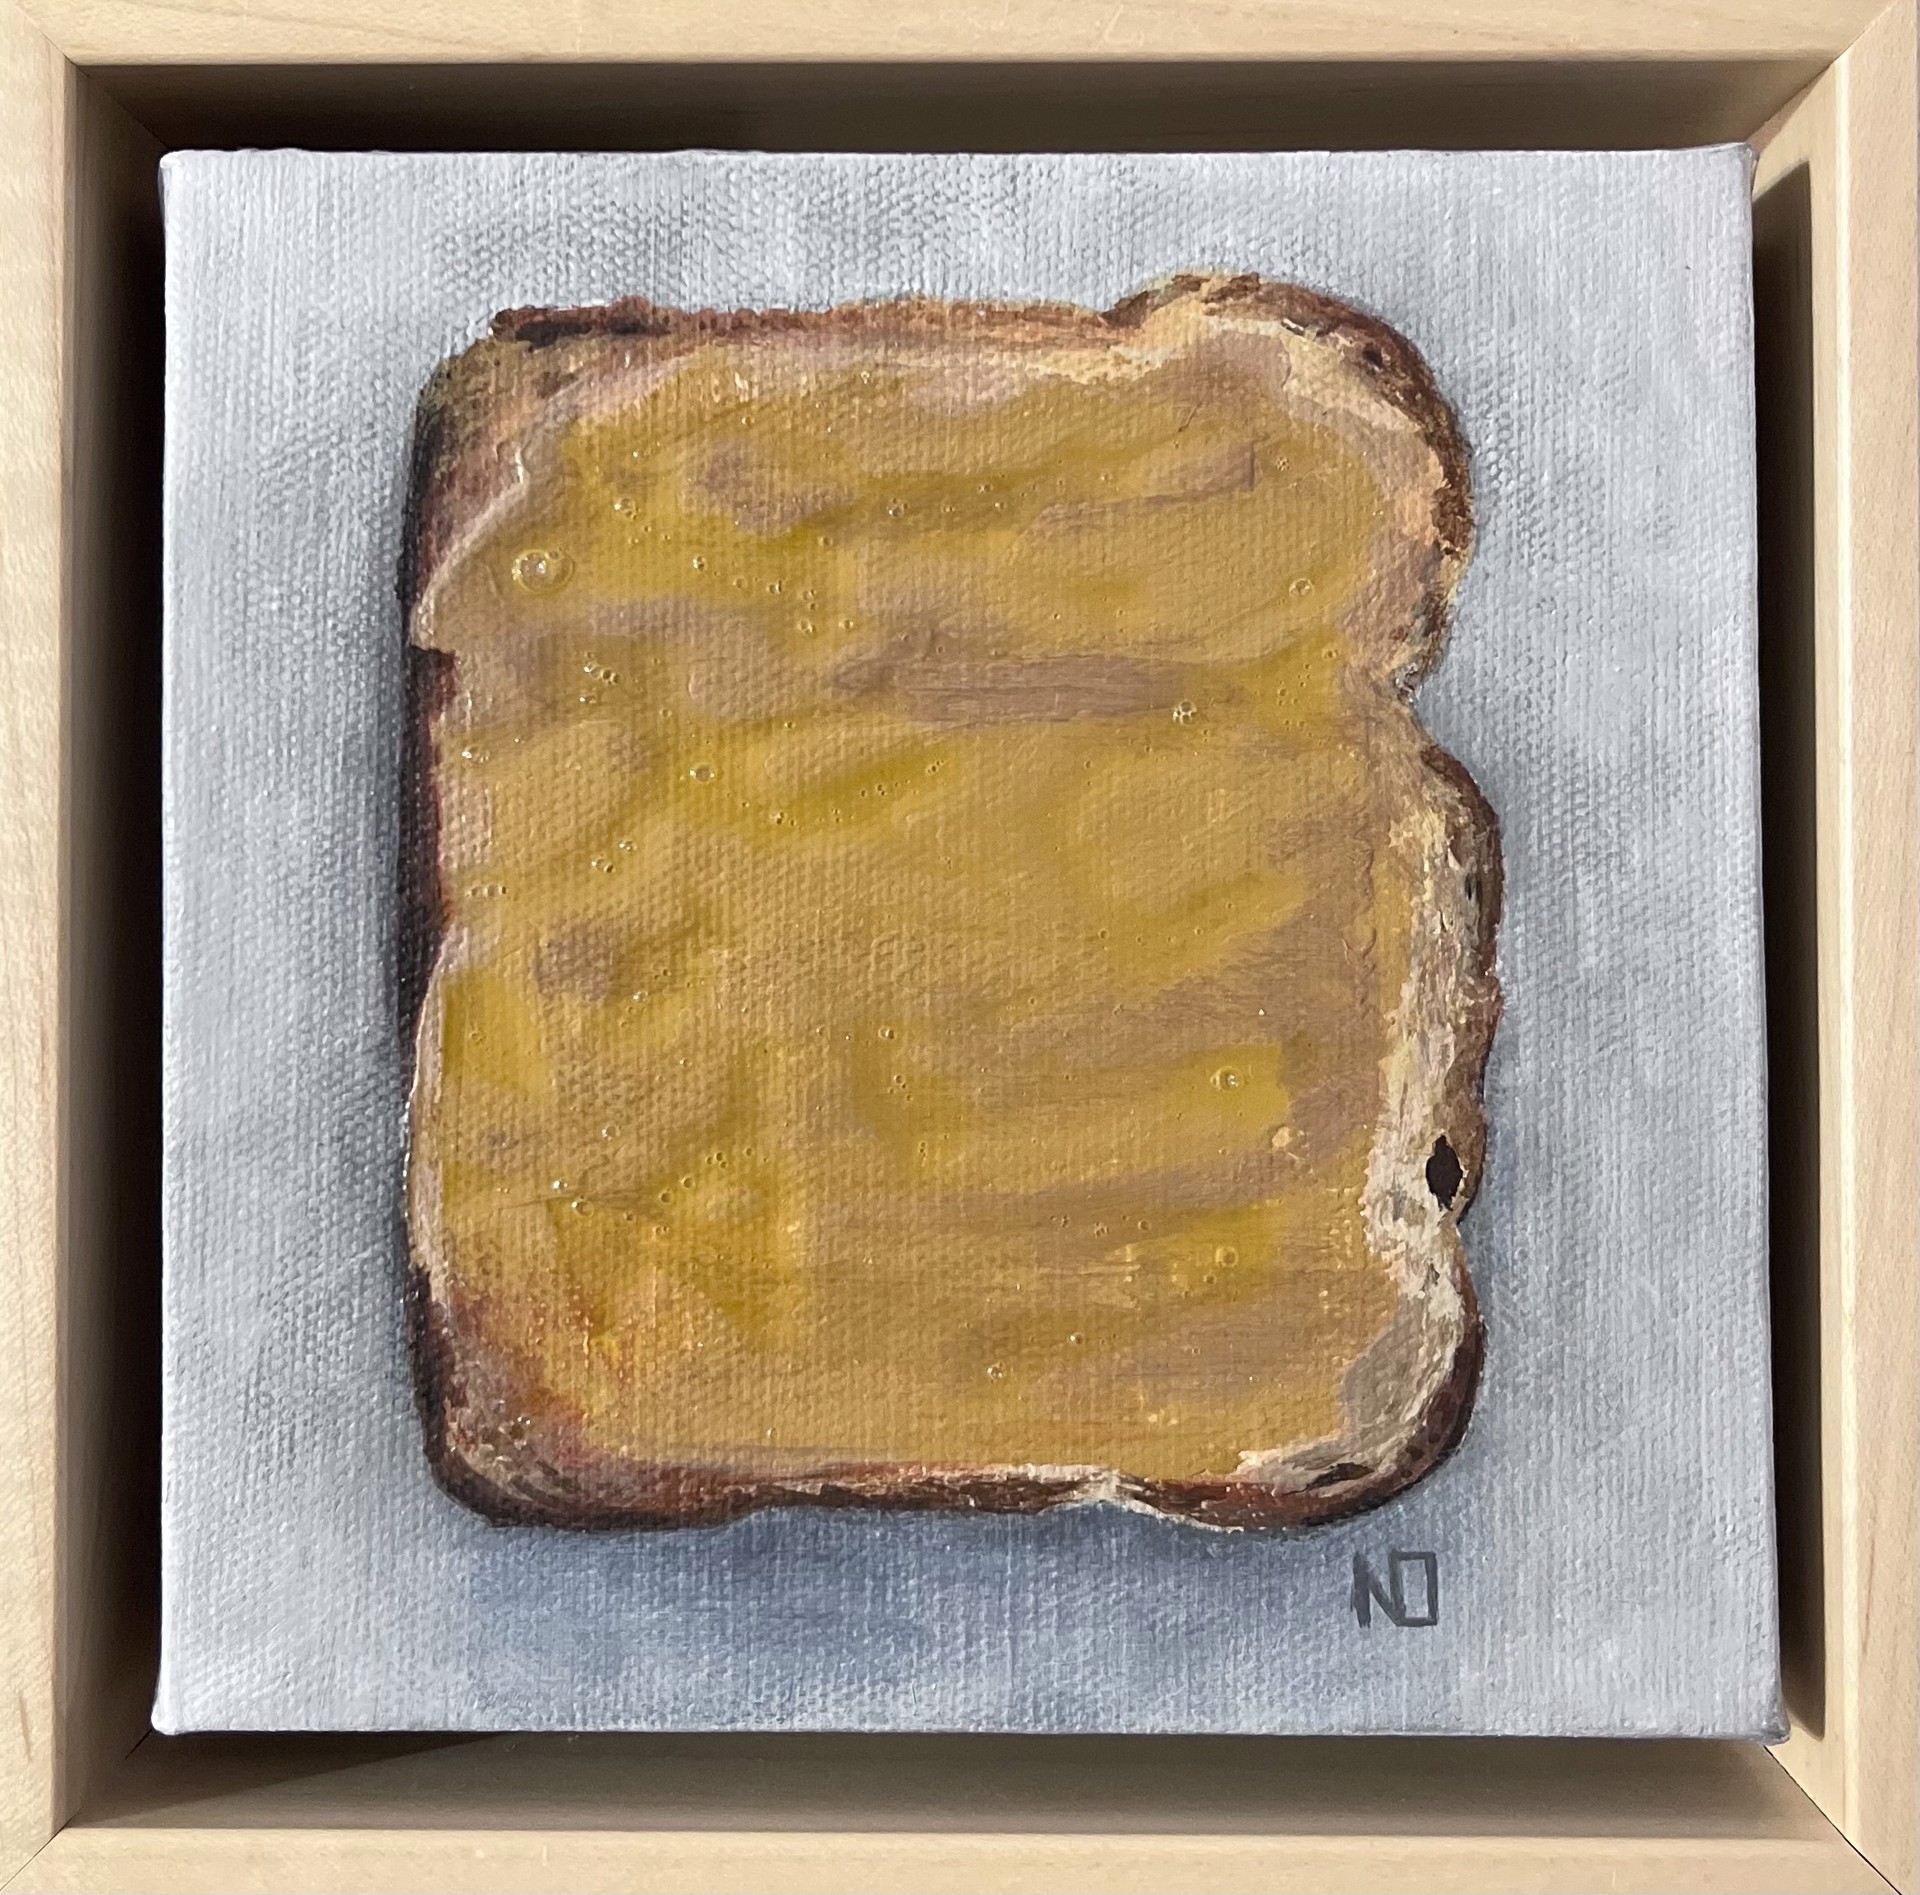 Drizzled Honey over Peanut Butter on Honey Wheat by Noel Young